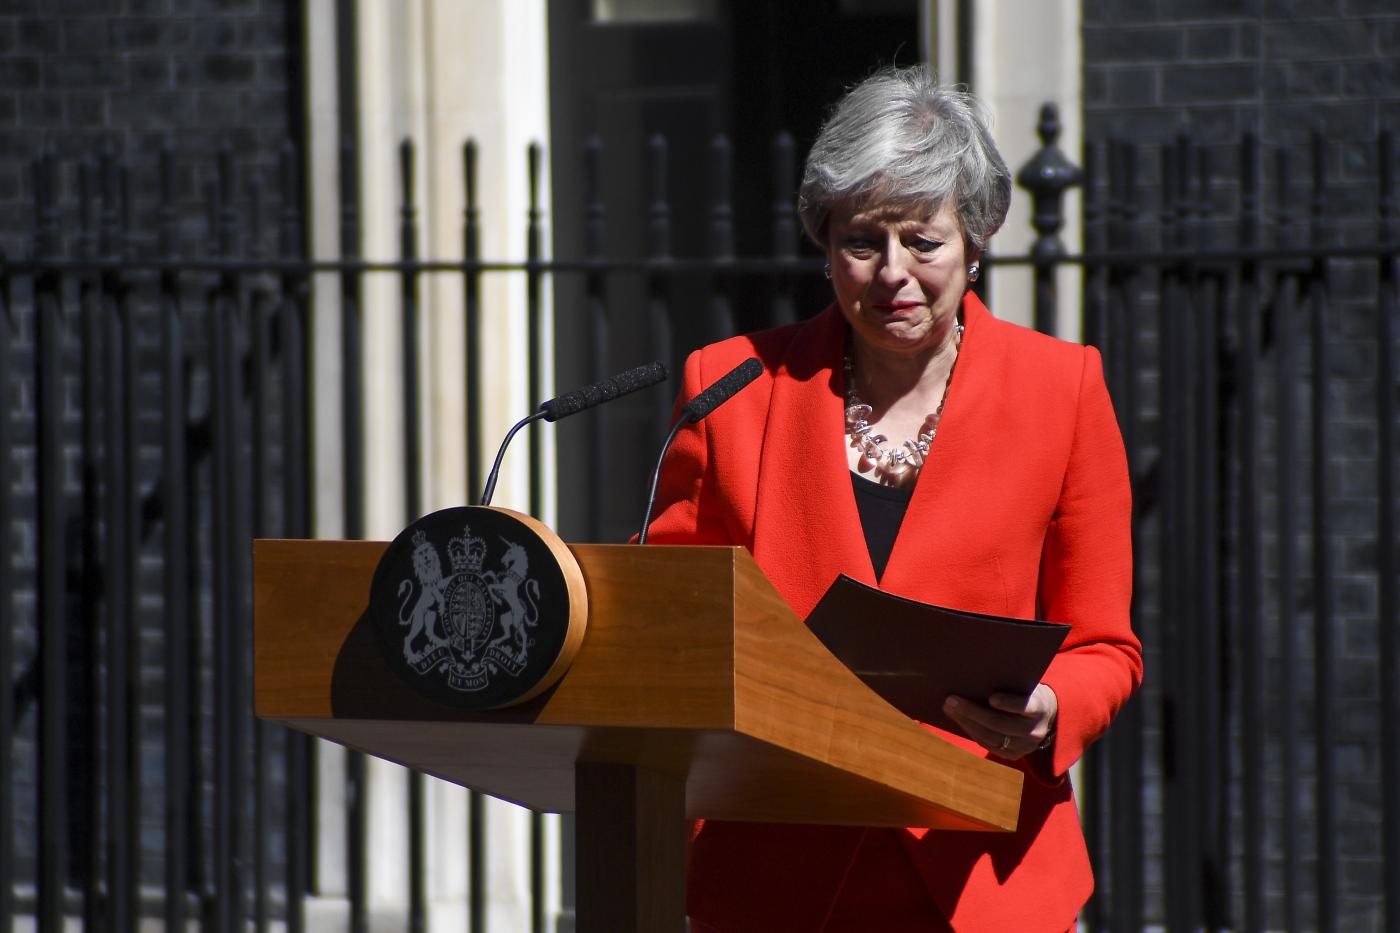 LONDON, May 24, 2019 (Xinhua) -- British Prime Minister Theresa May speaks to the media outside 10 Downing Street in London, Britain on May 24, 2019. Theresa May said on Friday that she will quit as Conservative leader on June 7, paving ways for contest to decide Britain's next prime minister. (Xinhua/Alberto Pezzali/IANS) by .